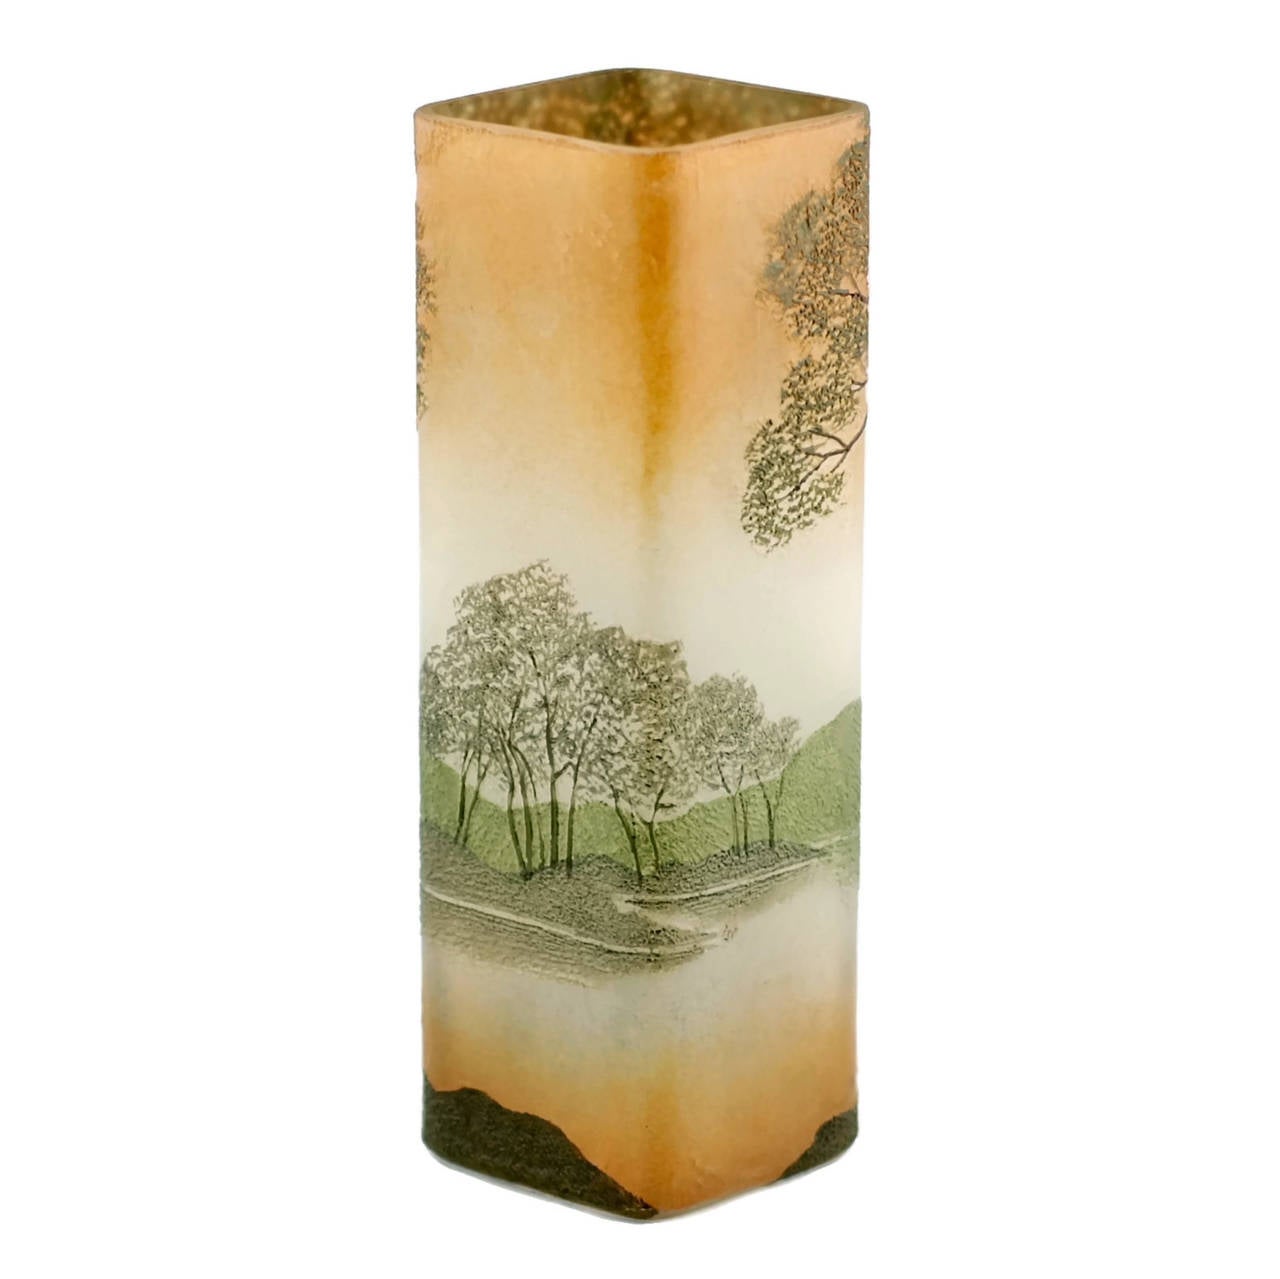 This early 20th century Art Nouveau enameled cameo glass vase was made by French art glass manufacturer Legras and has been executed in shades of brown, green and apricot. The piece has a square body featuring a landscape scene made up of delicate